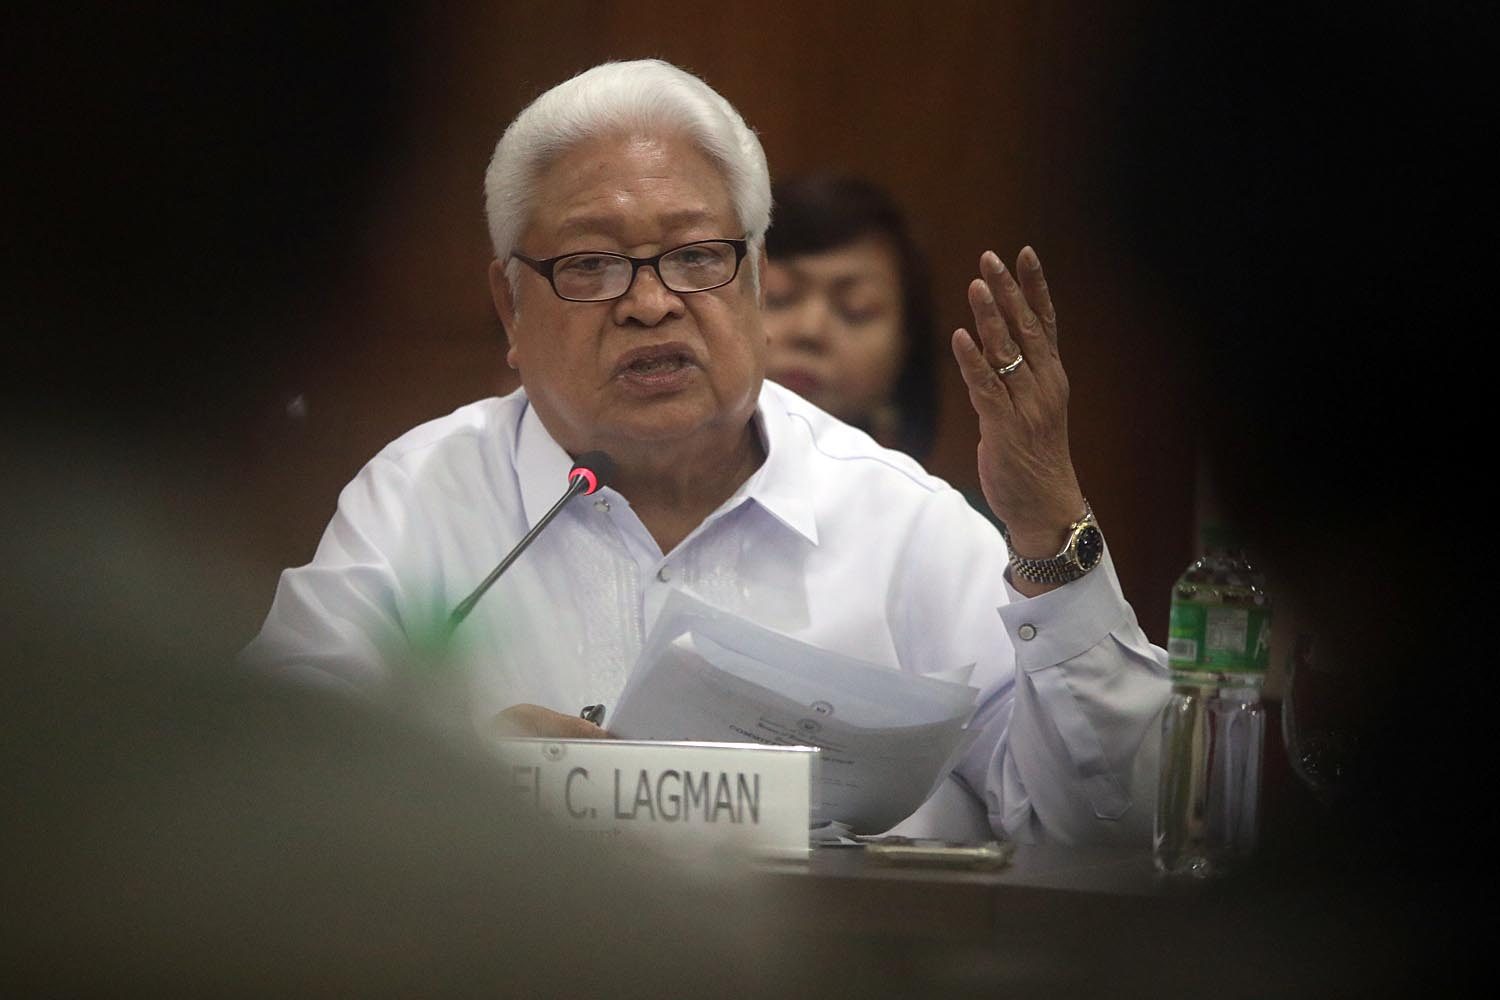 Constitution sacred, ‘cannot be amended at will or convenience’ – Lagman